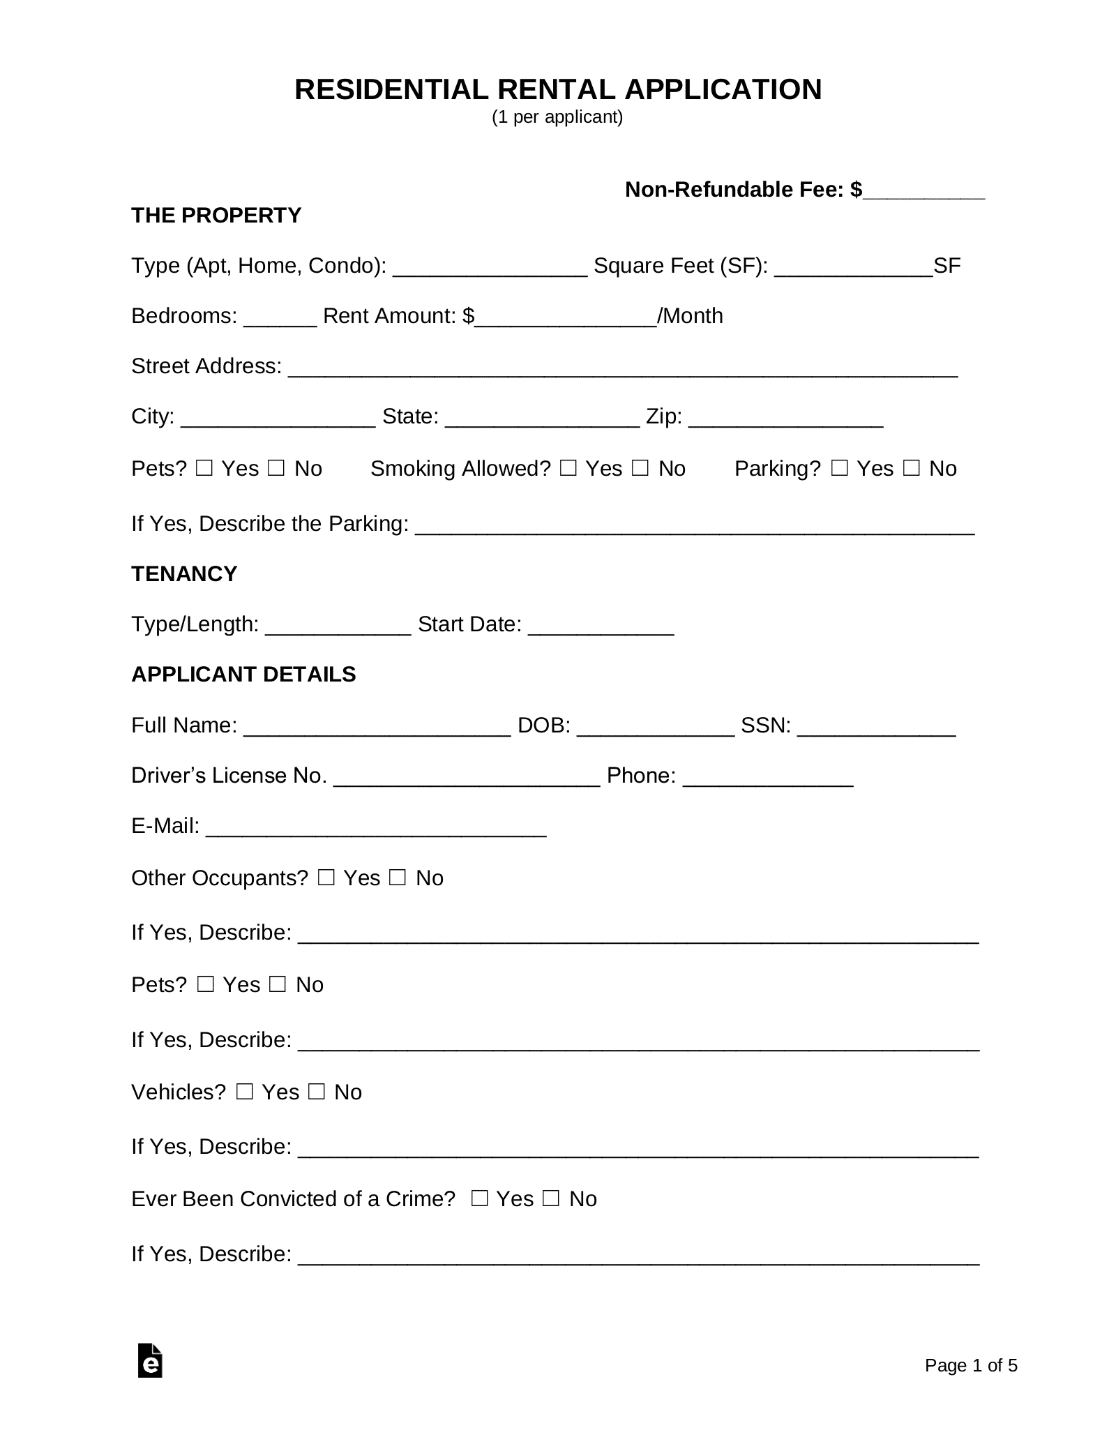 An example of a rental application intake form for a property management company